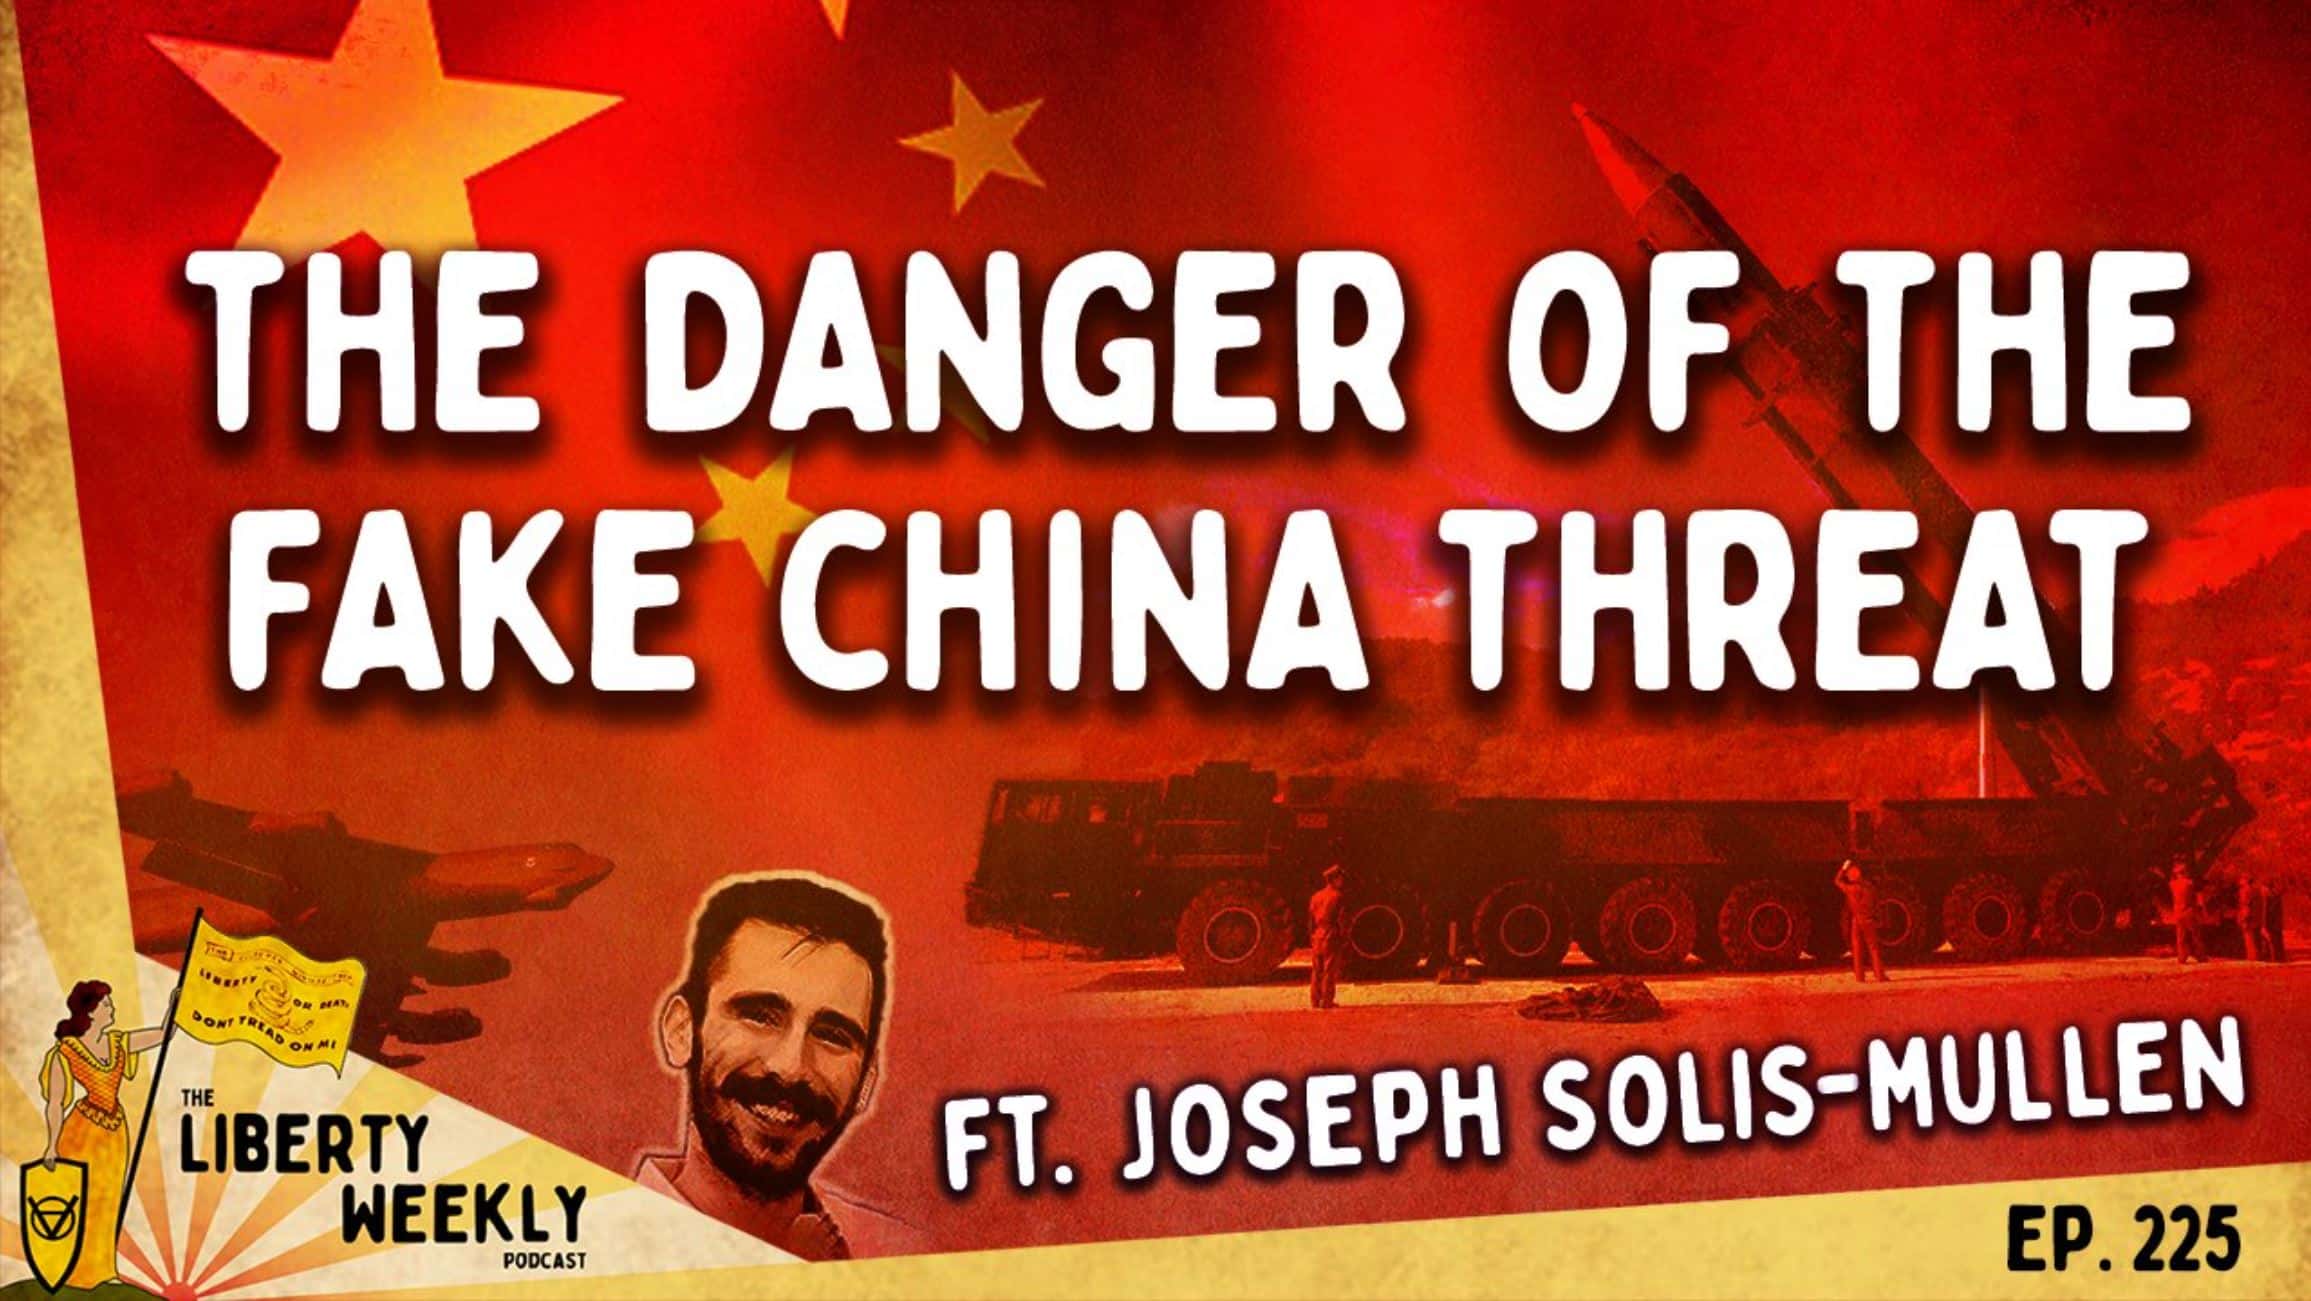 The Danger of the Fake China Threat ft. Joseph Solis-Mullen Ep. 225